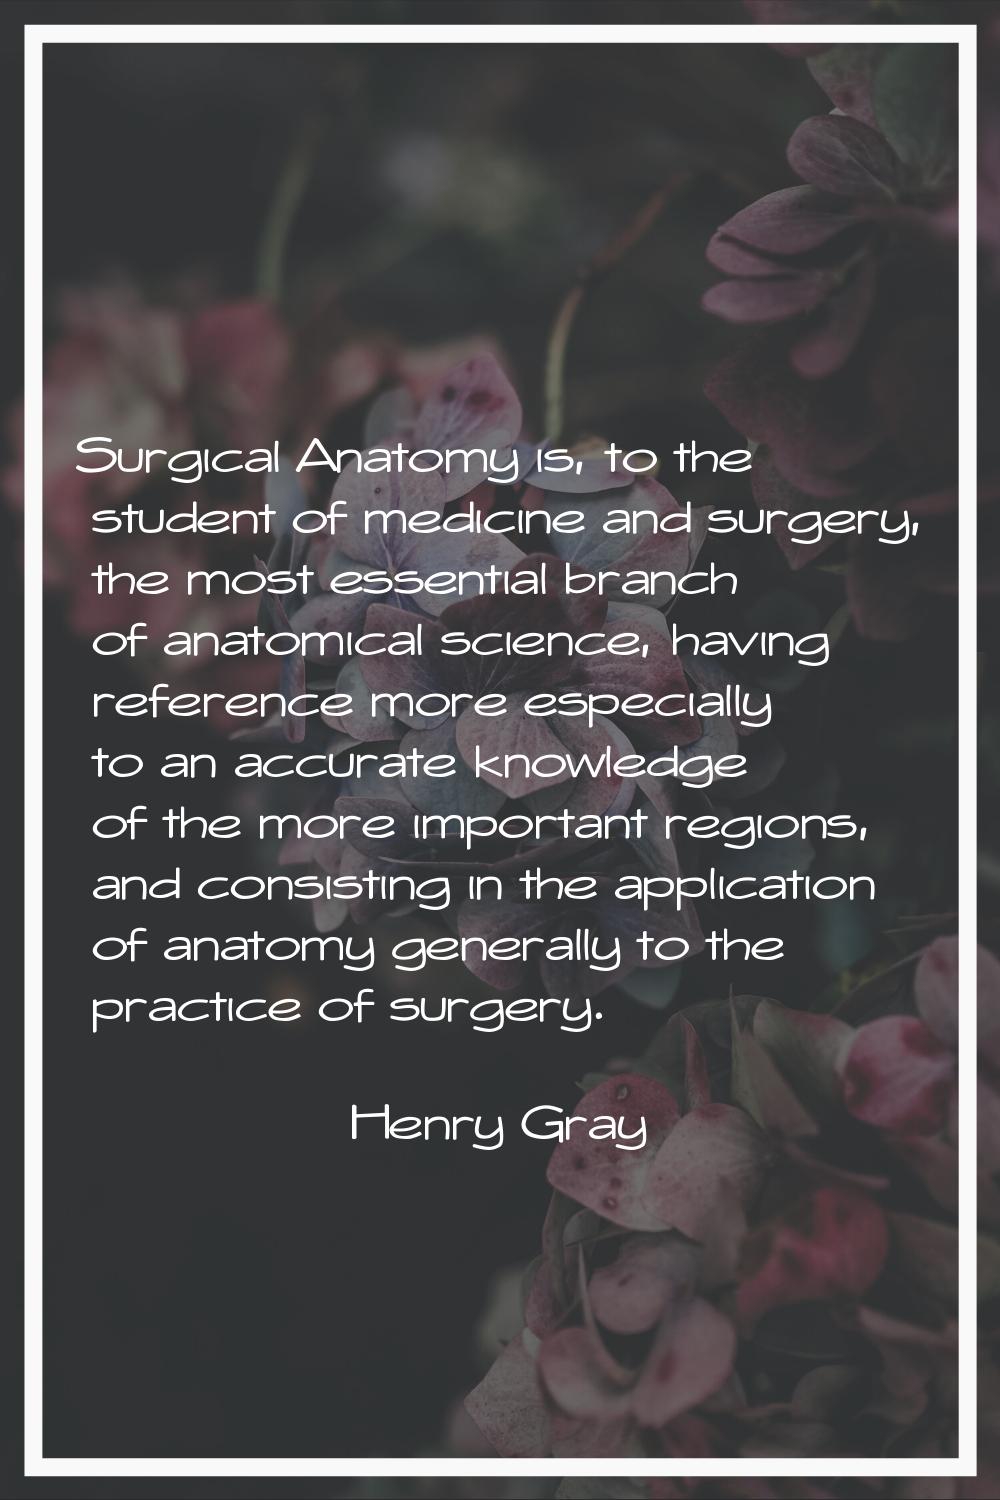 Surgical Anatomy is, to the student of medicine and surgery, the most essential branch of anatomica